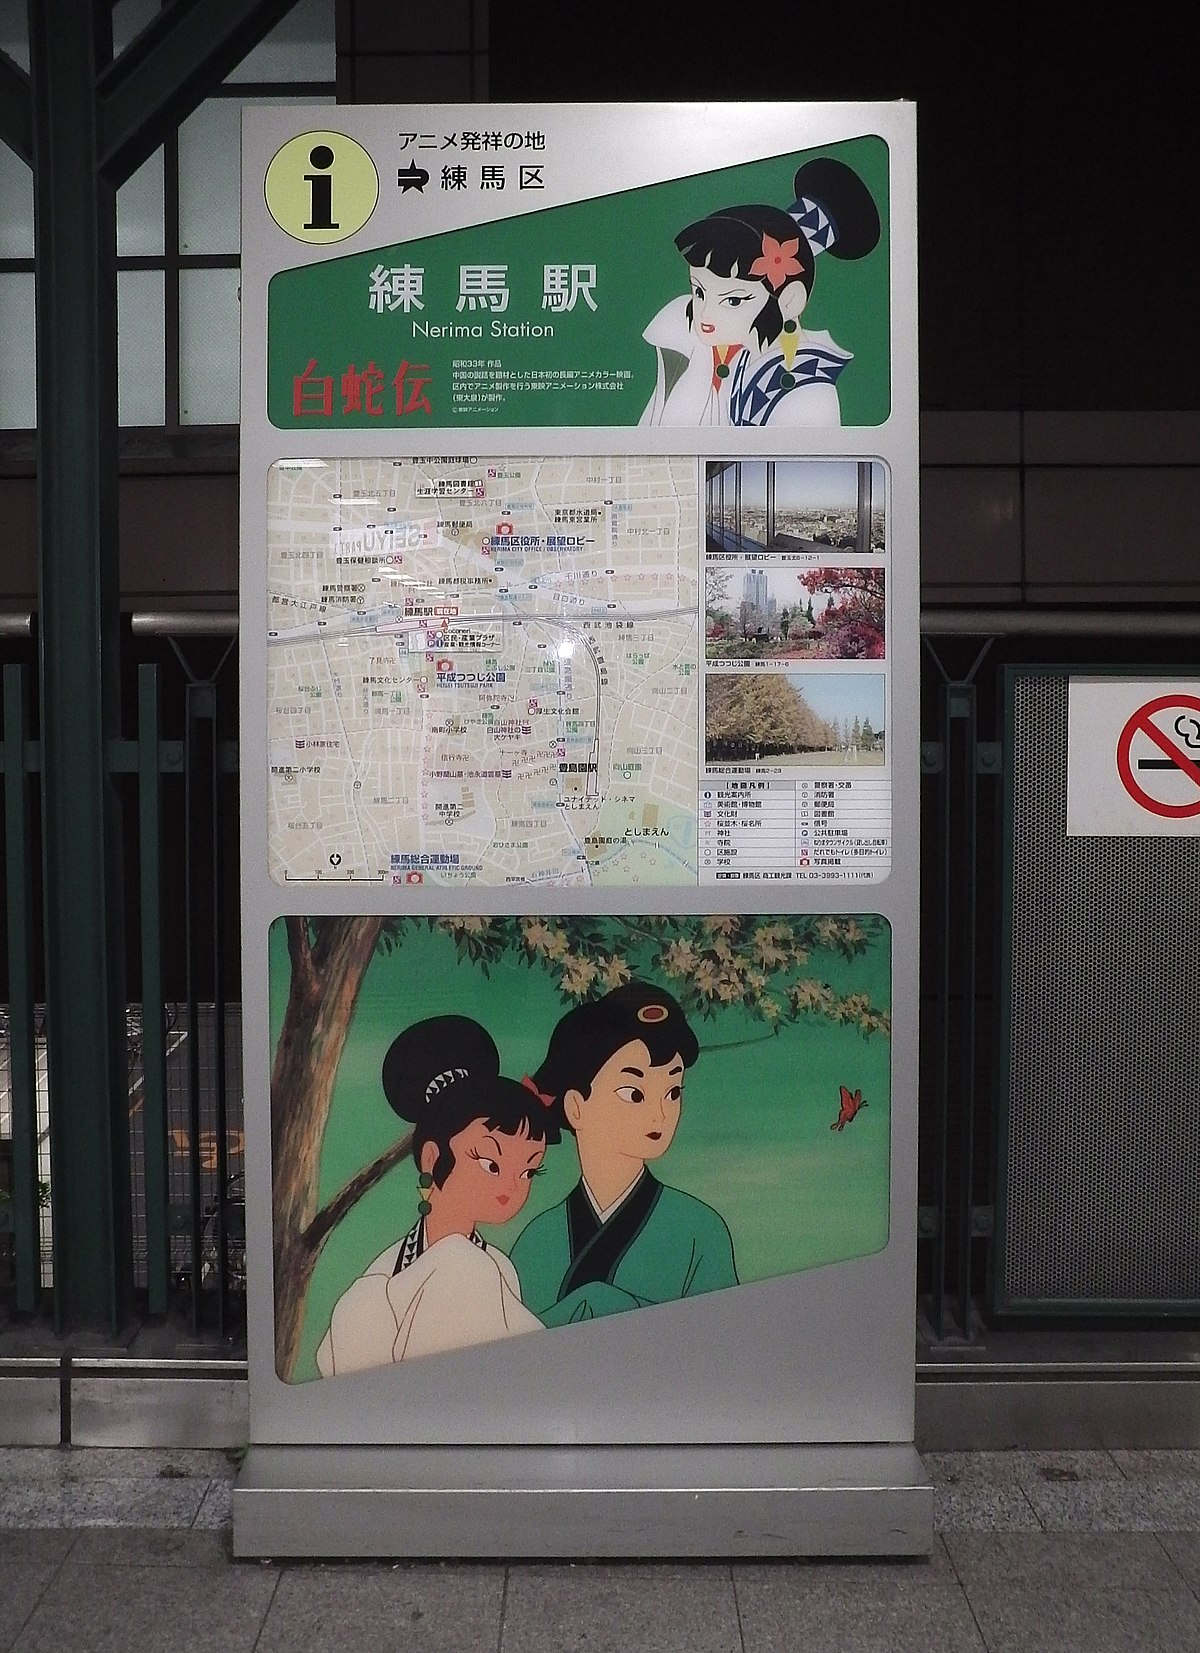 Got a pic of the train station from the anime! : r/SeishunButaYarou